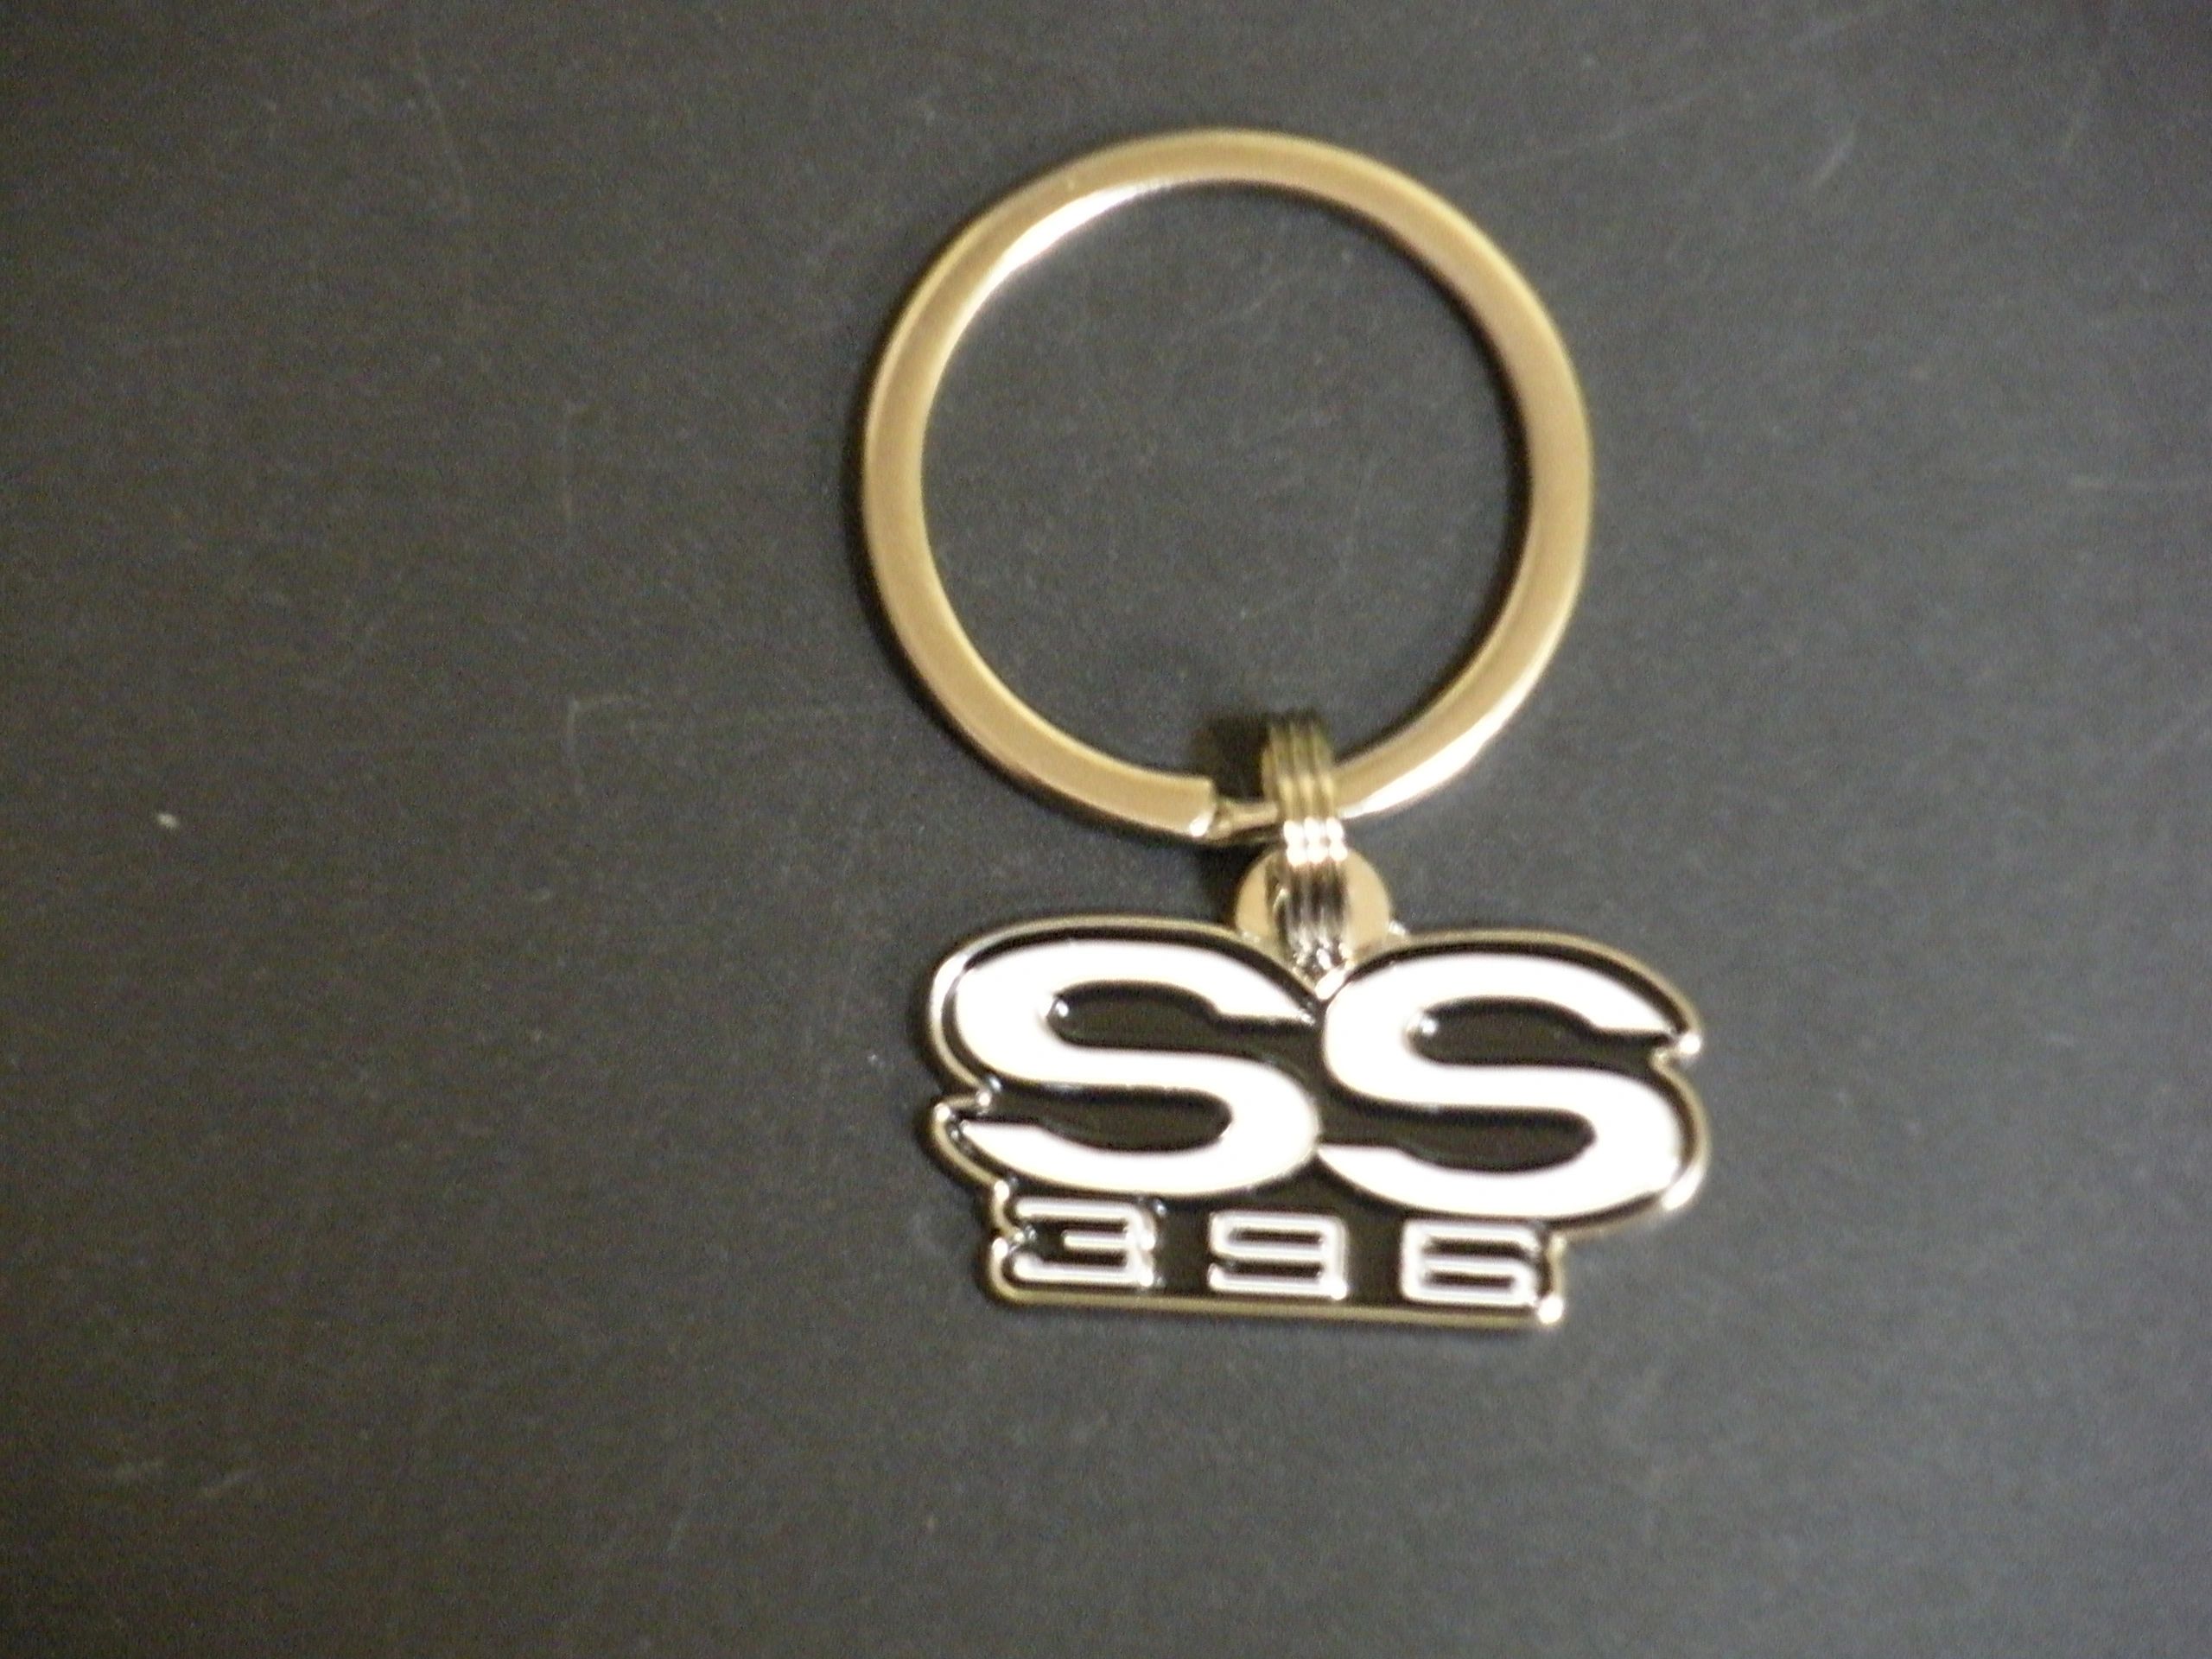 SS 396 KEYCHAIN single pack 